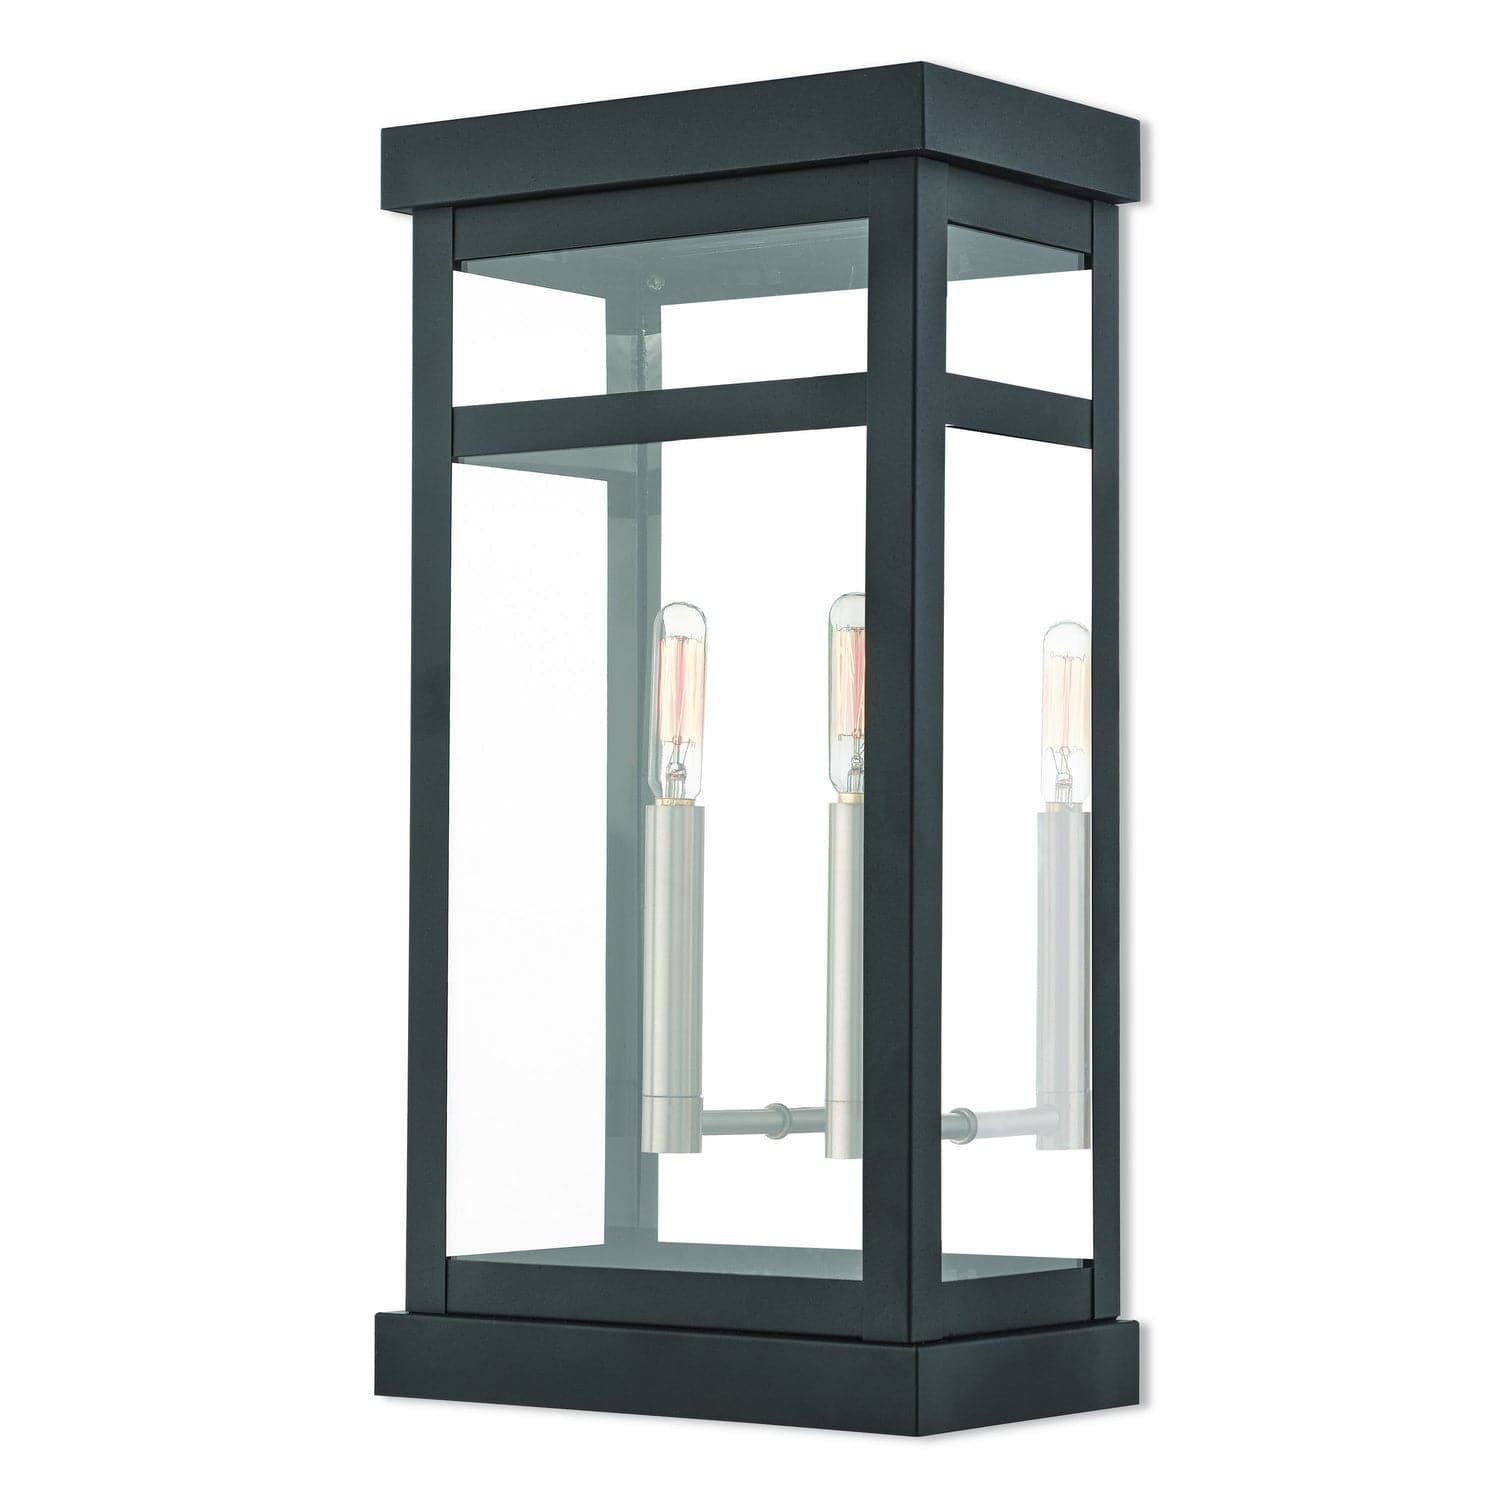 Livex Lighting - 20704-04 - Two Light Outdoor Wall Lantern - Hopewell - Black w/ Brushed Nickel Cluster and Polished Chrome Stainless Steel